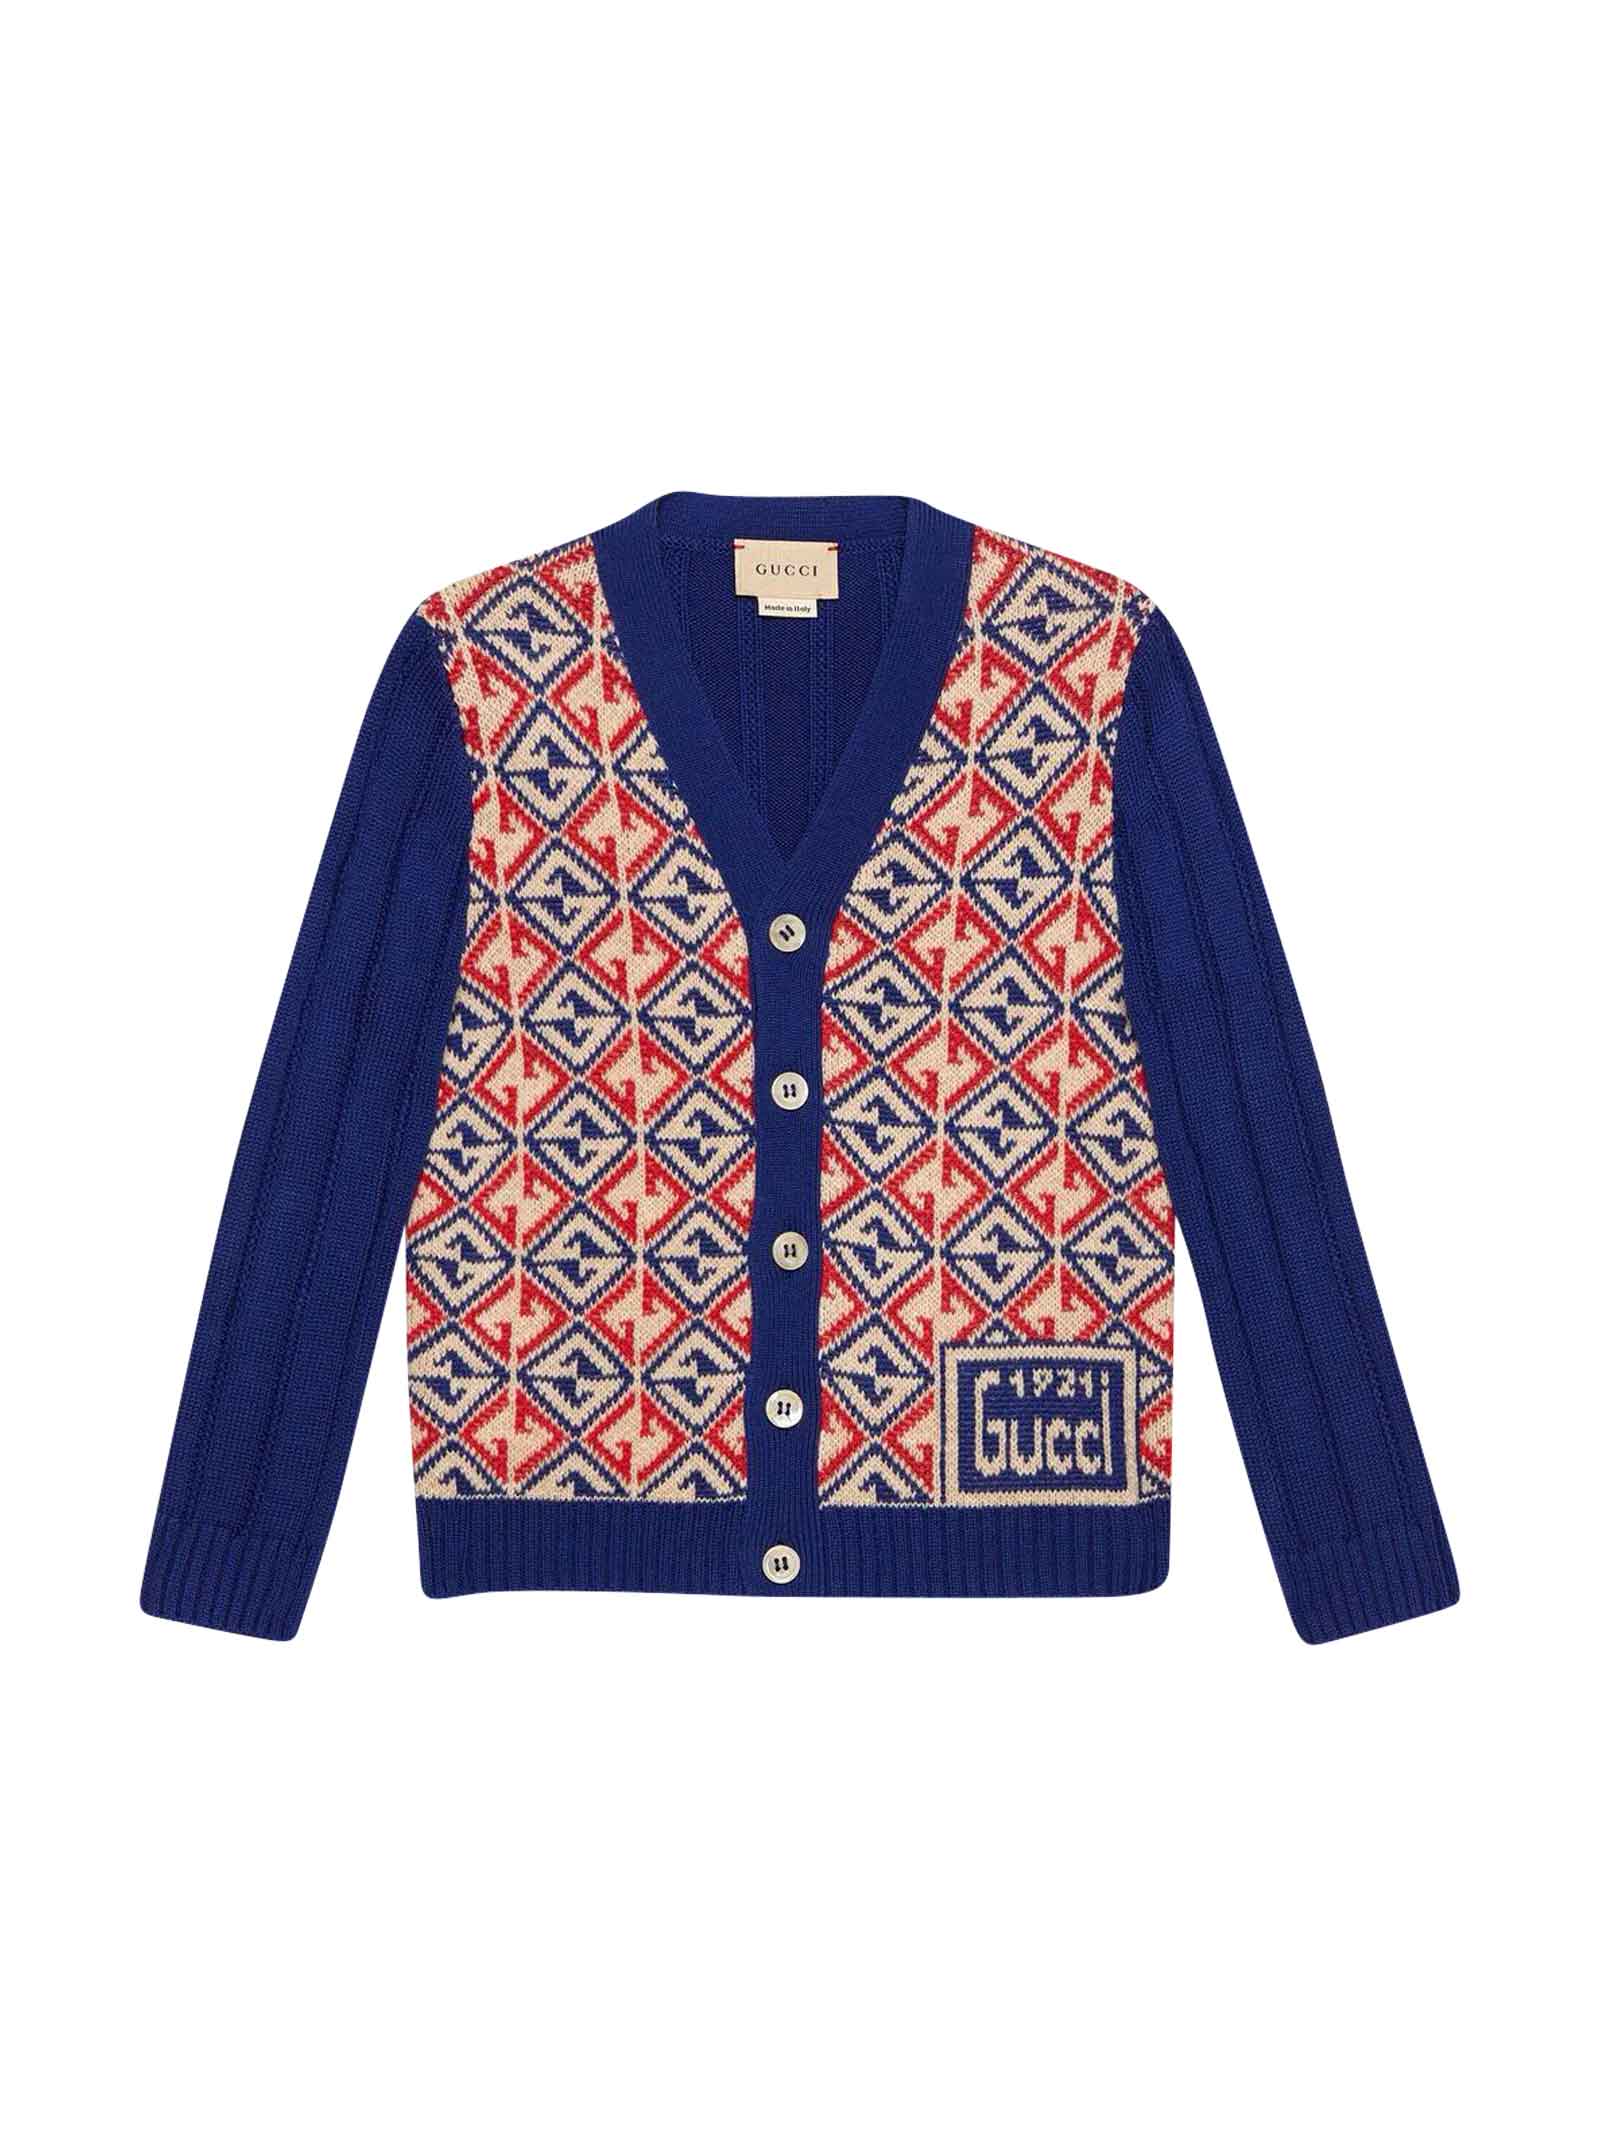 Gucci Blue And Red Cardigan